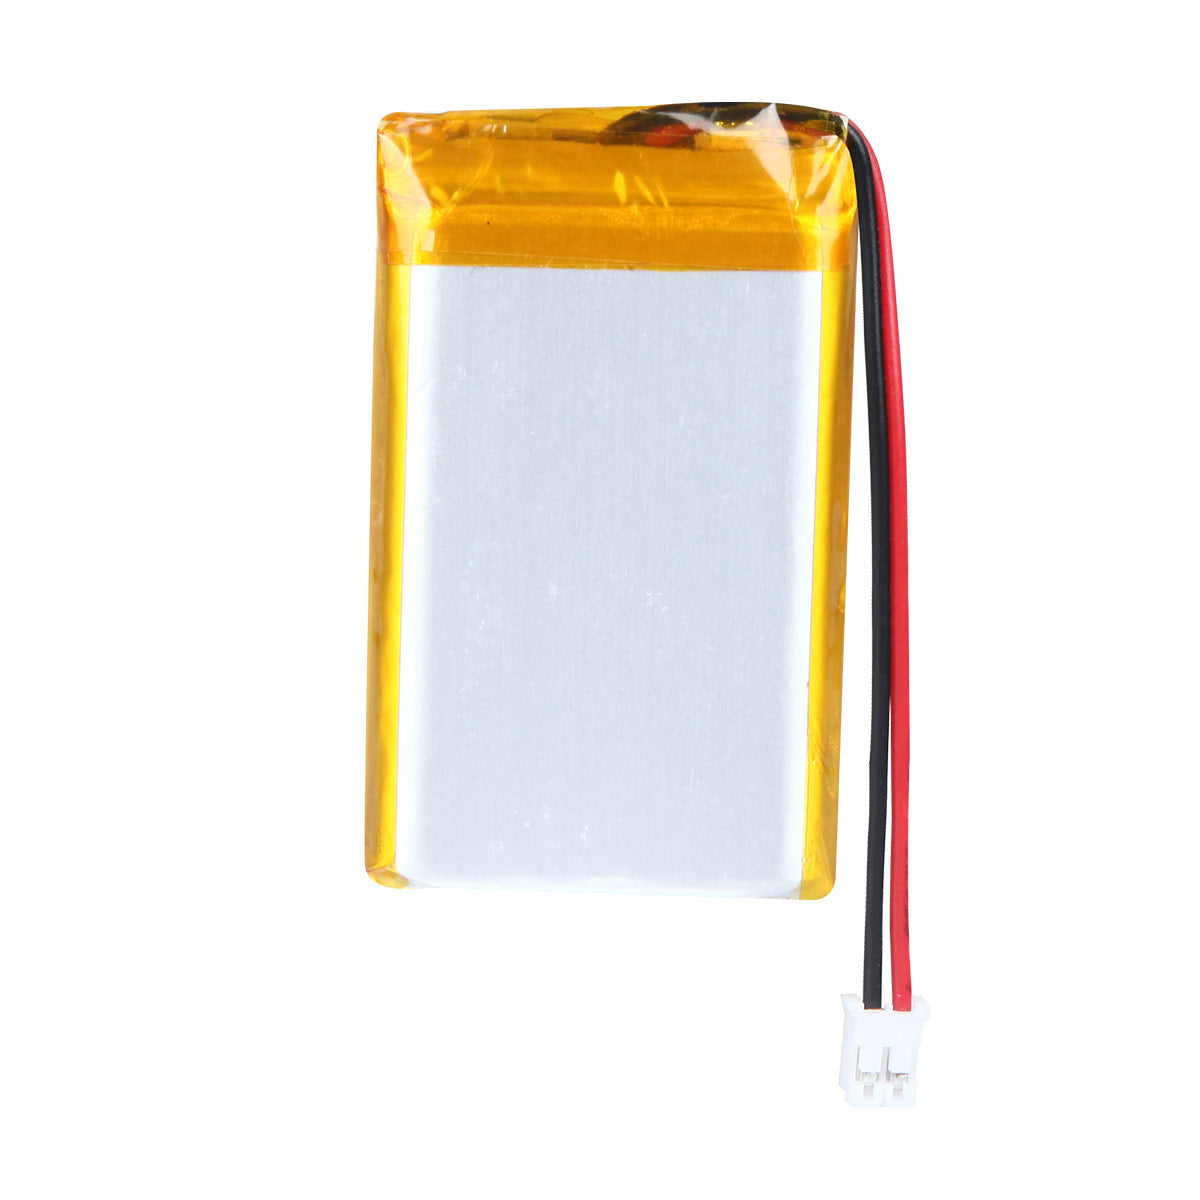 YDL 3.7V 1200mAh 753048 Rechargeable Polymer Lithium-Ion Battery